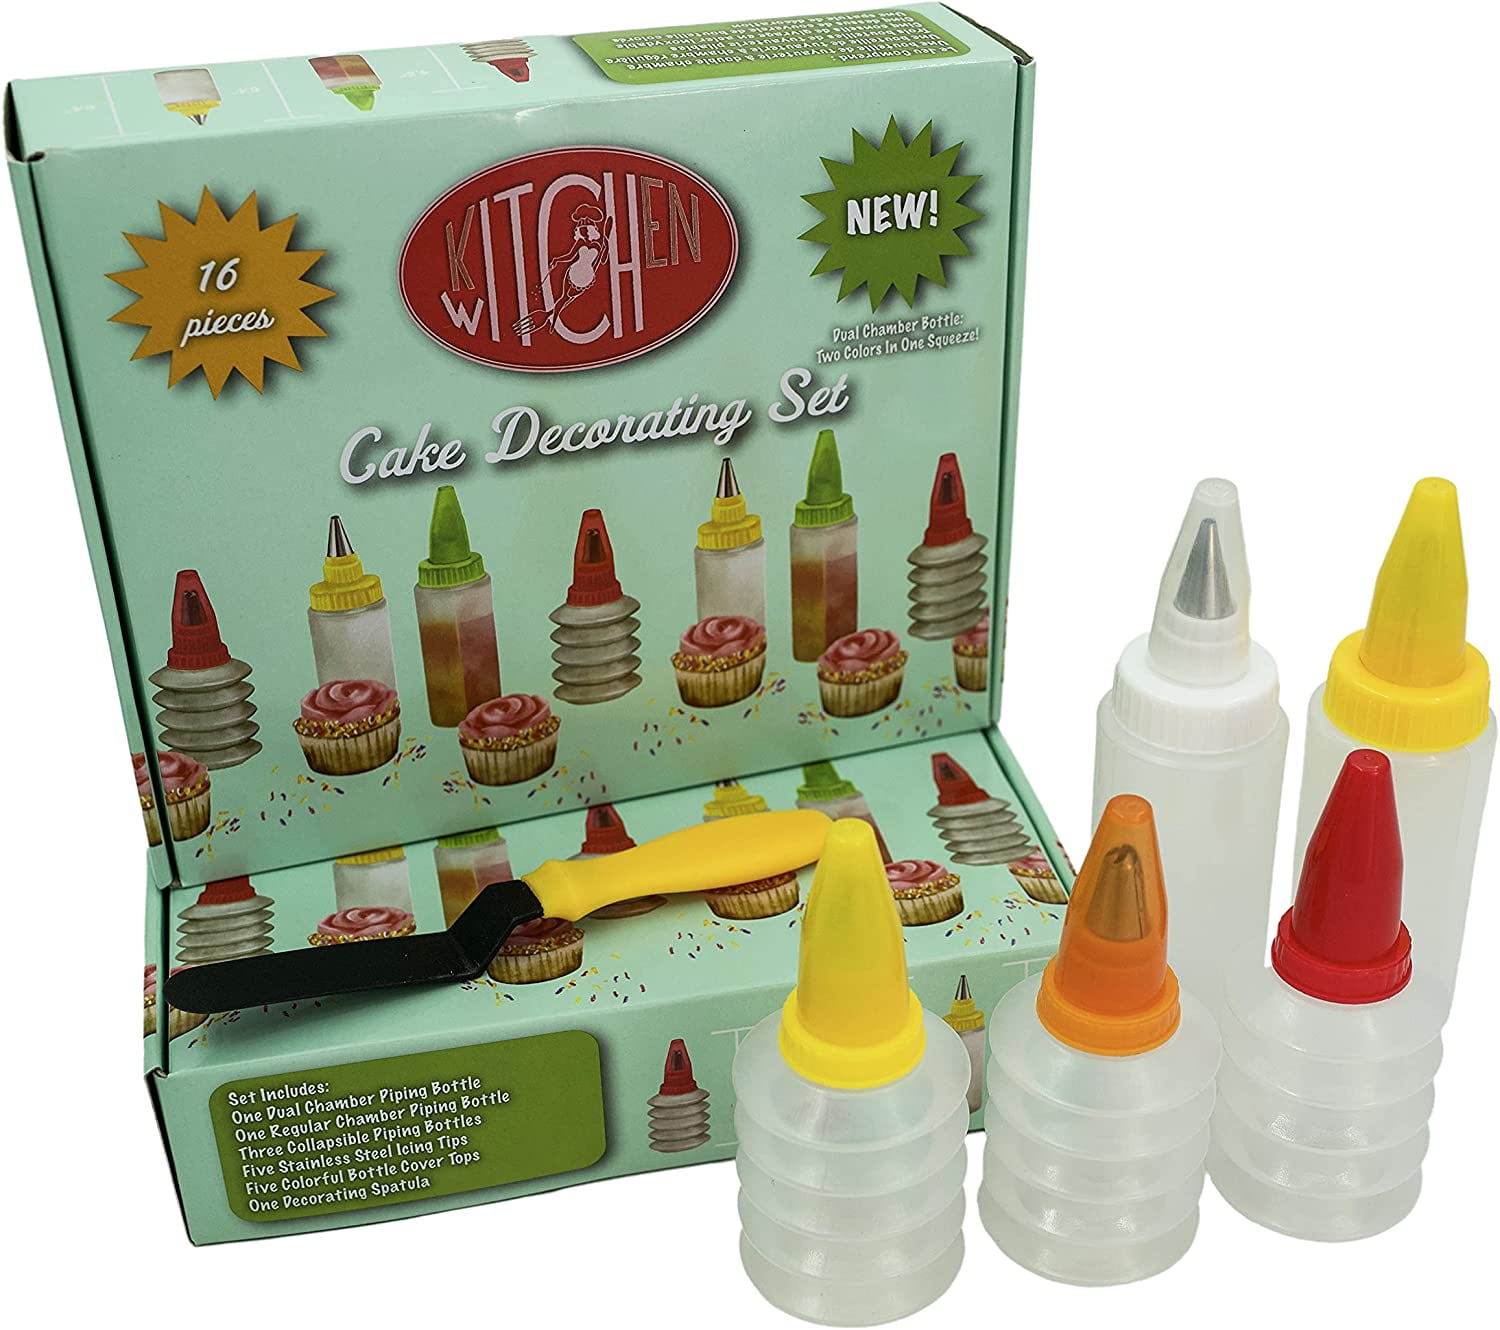 KITCHEN Witch 11 Piece Icing Bottles Kit with Stainless Steel